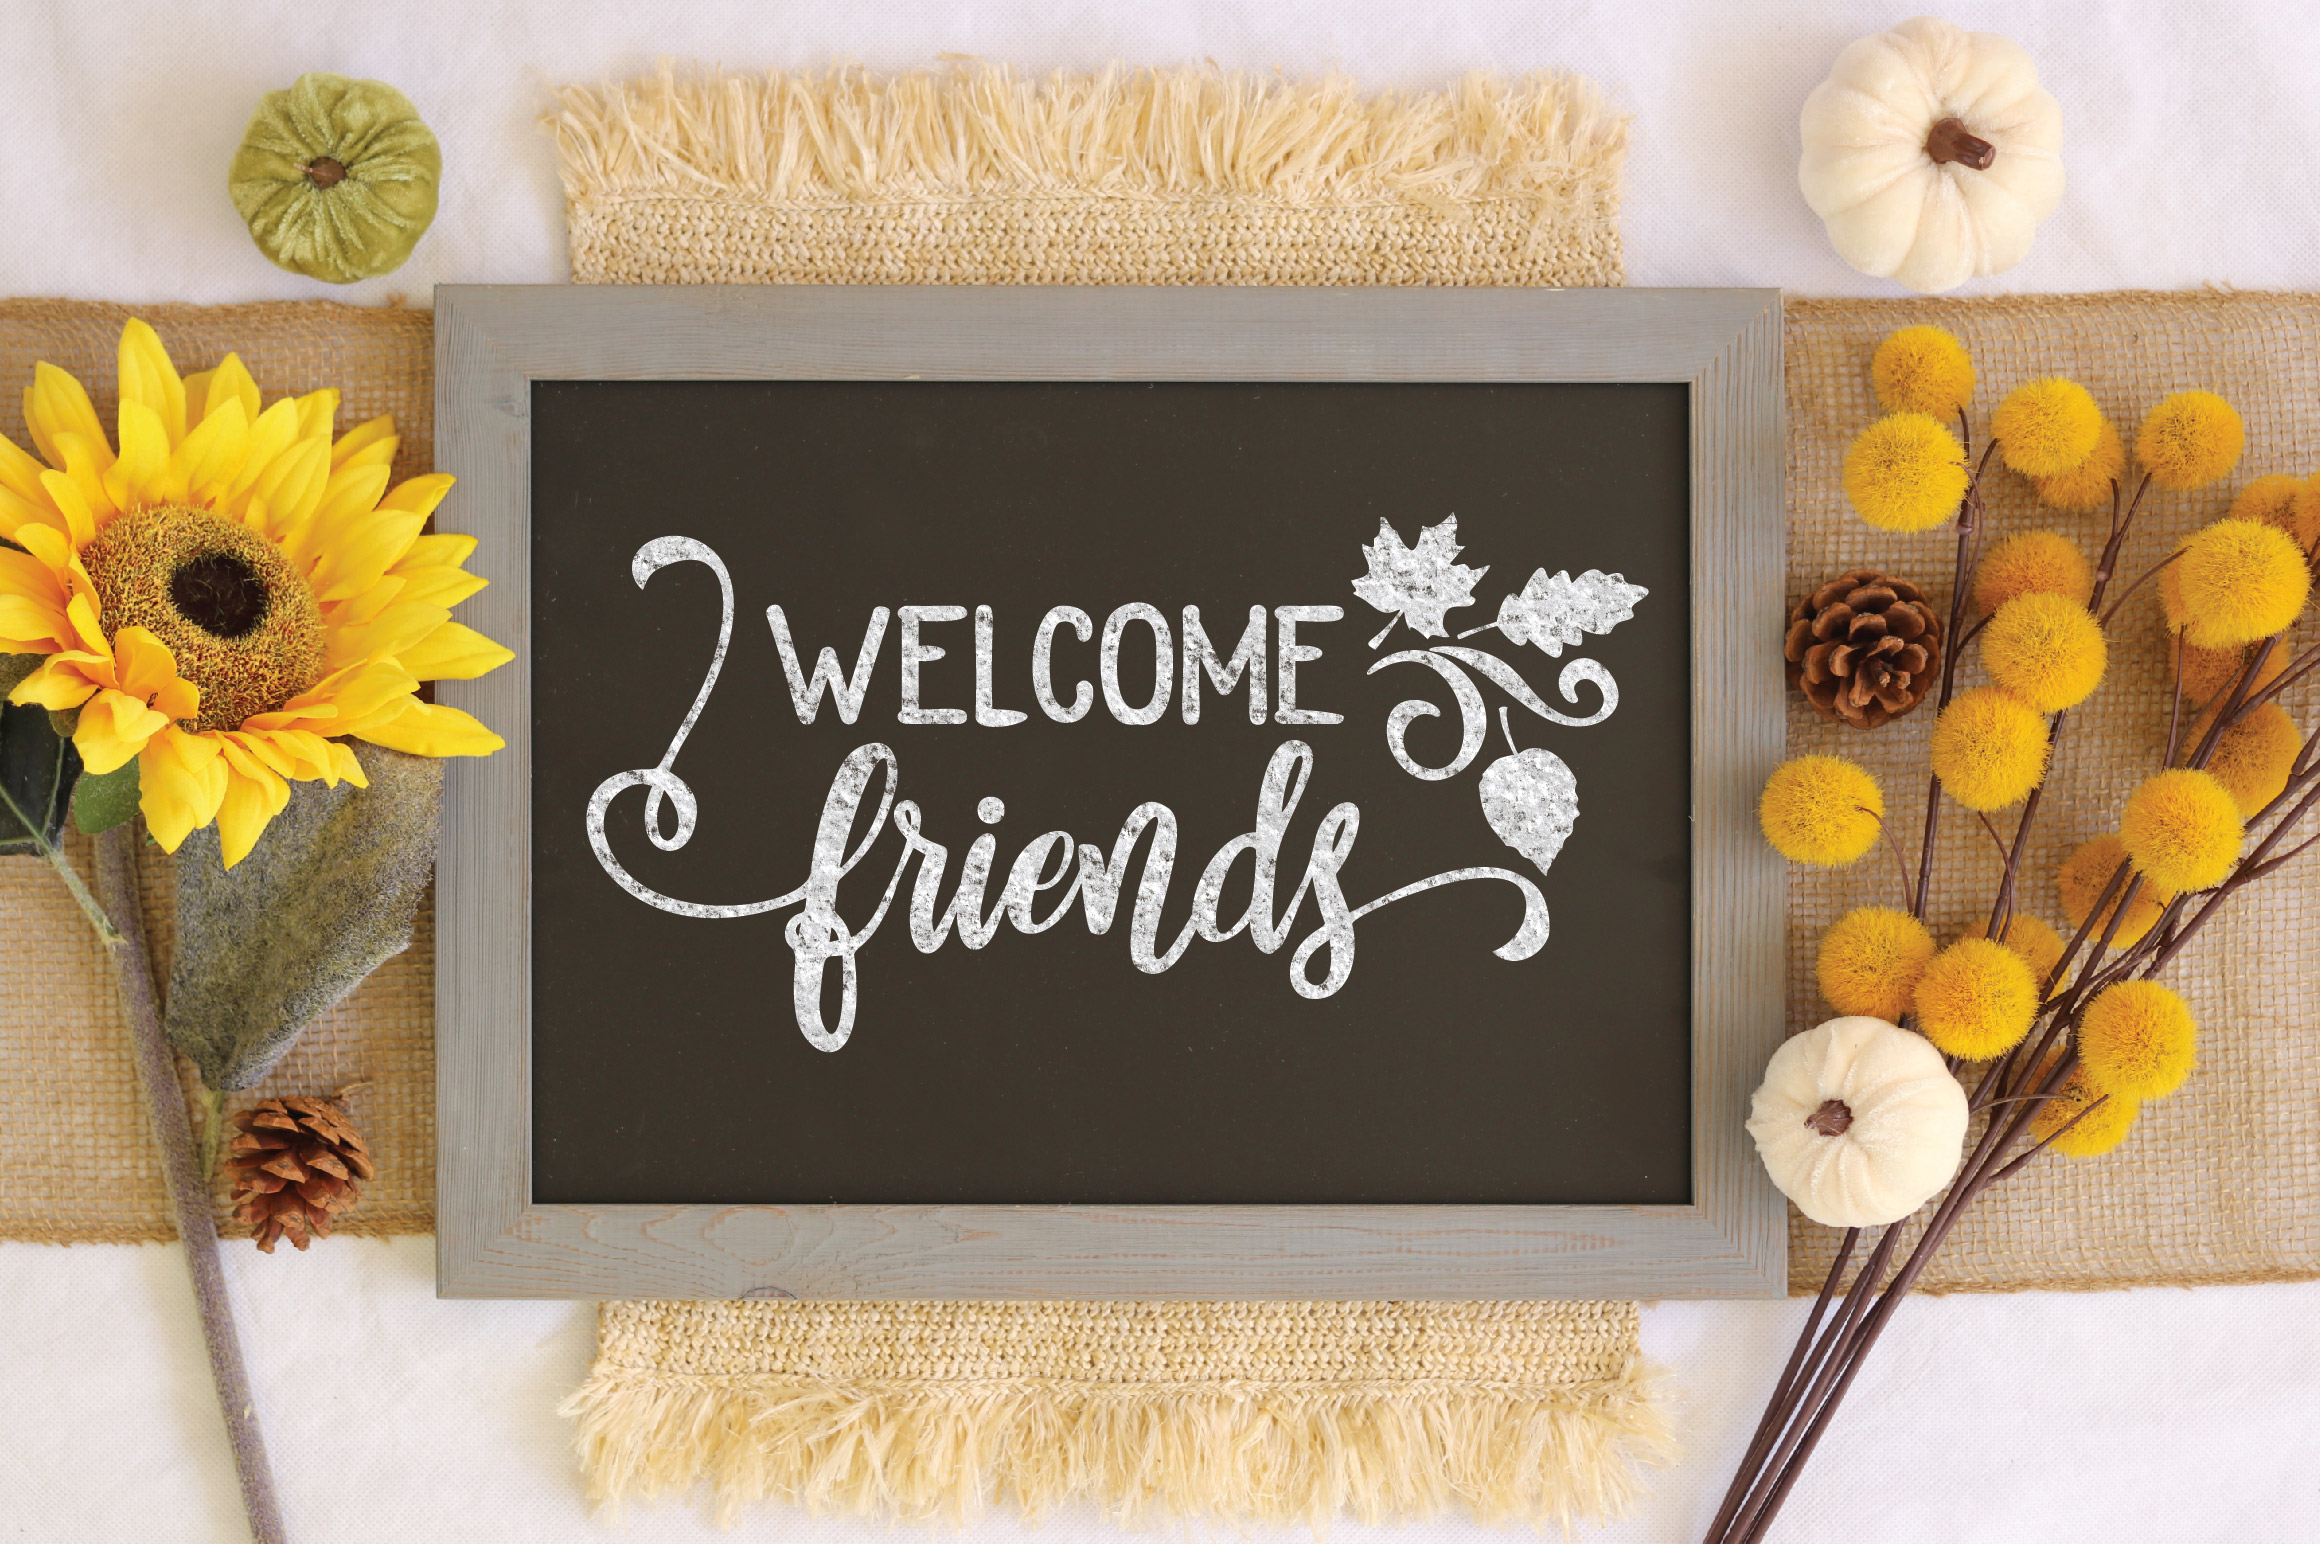 Download Welcome Friends SVG Cut File - Fall Farmhouse SVG PNG DXF